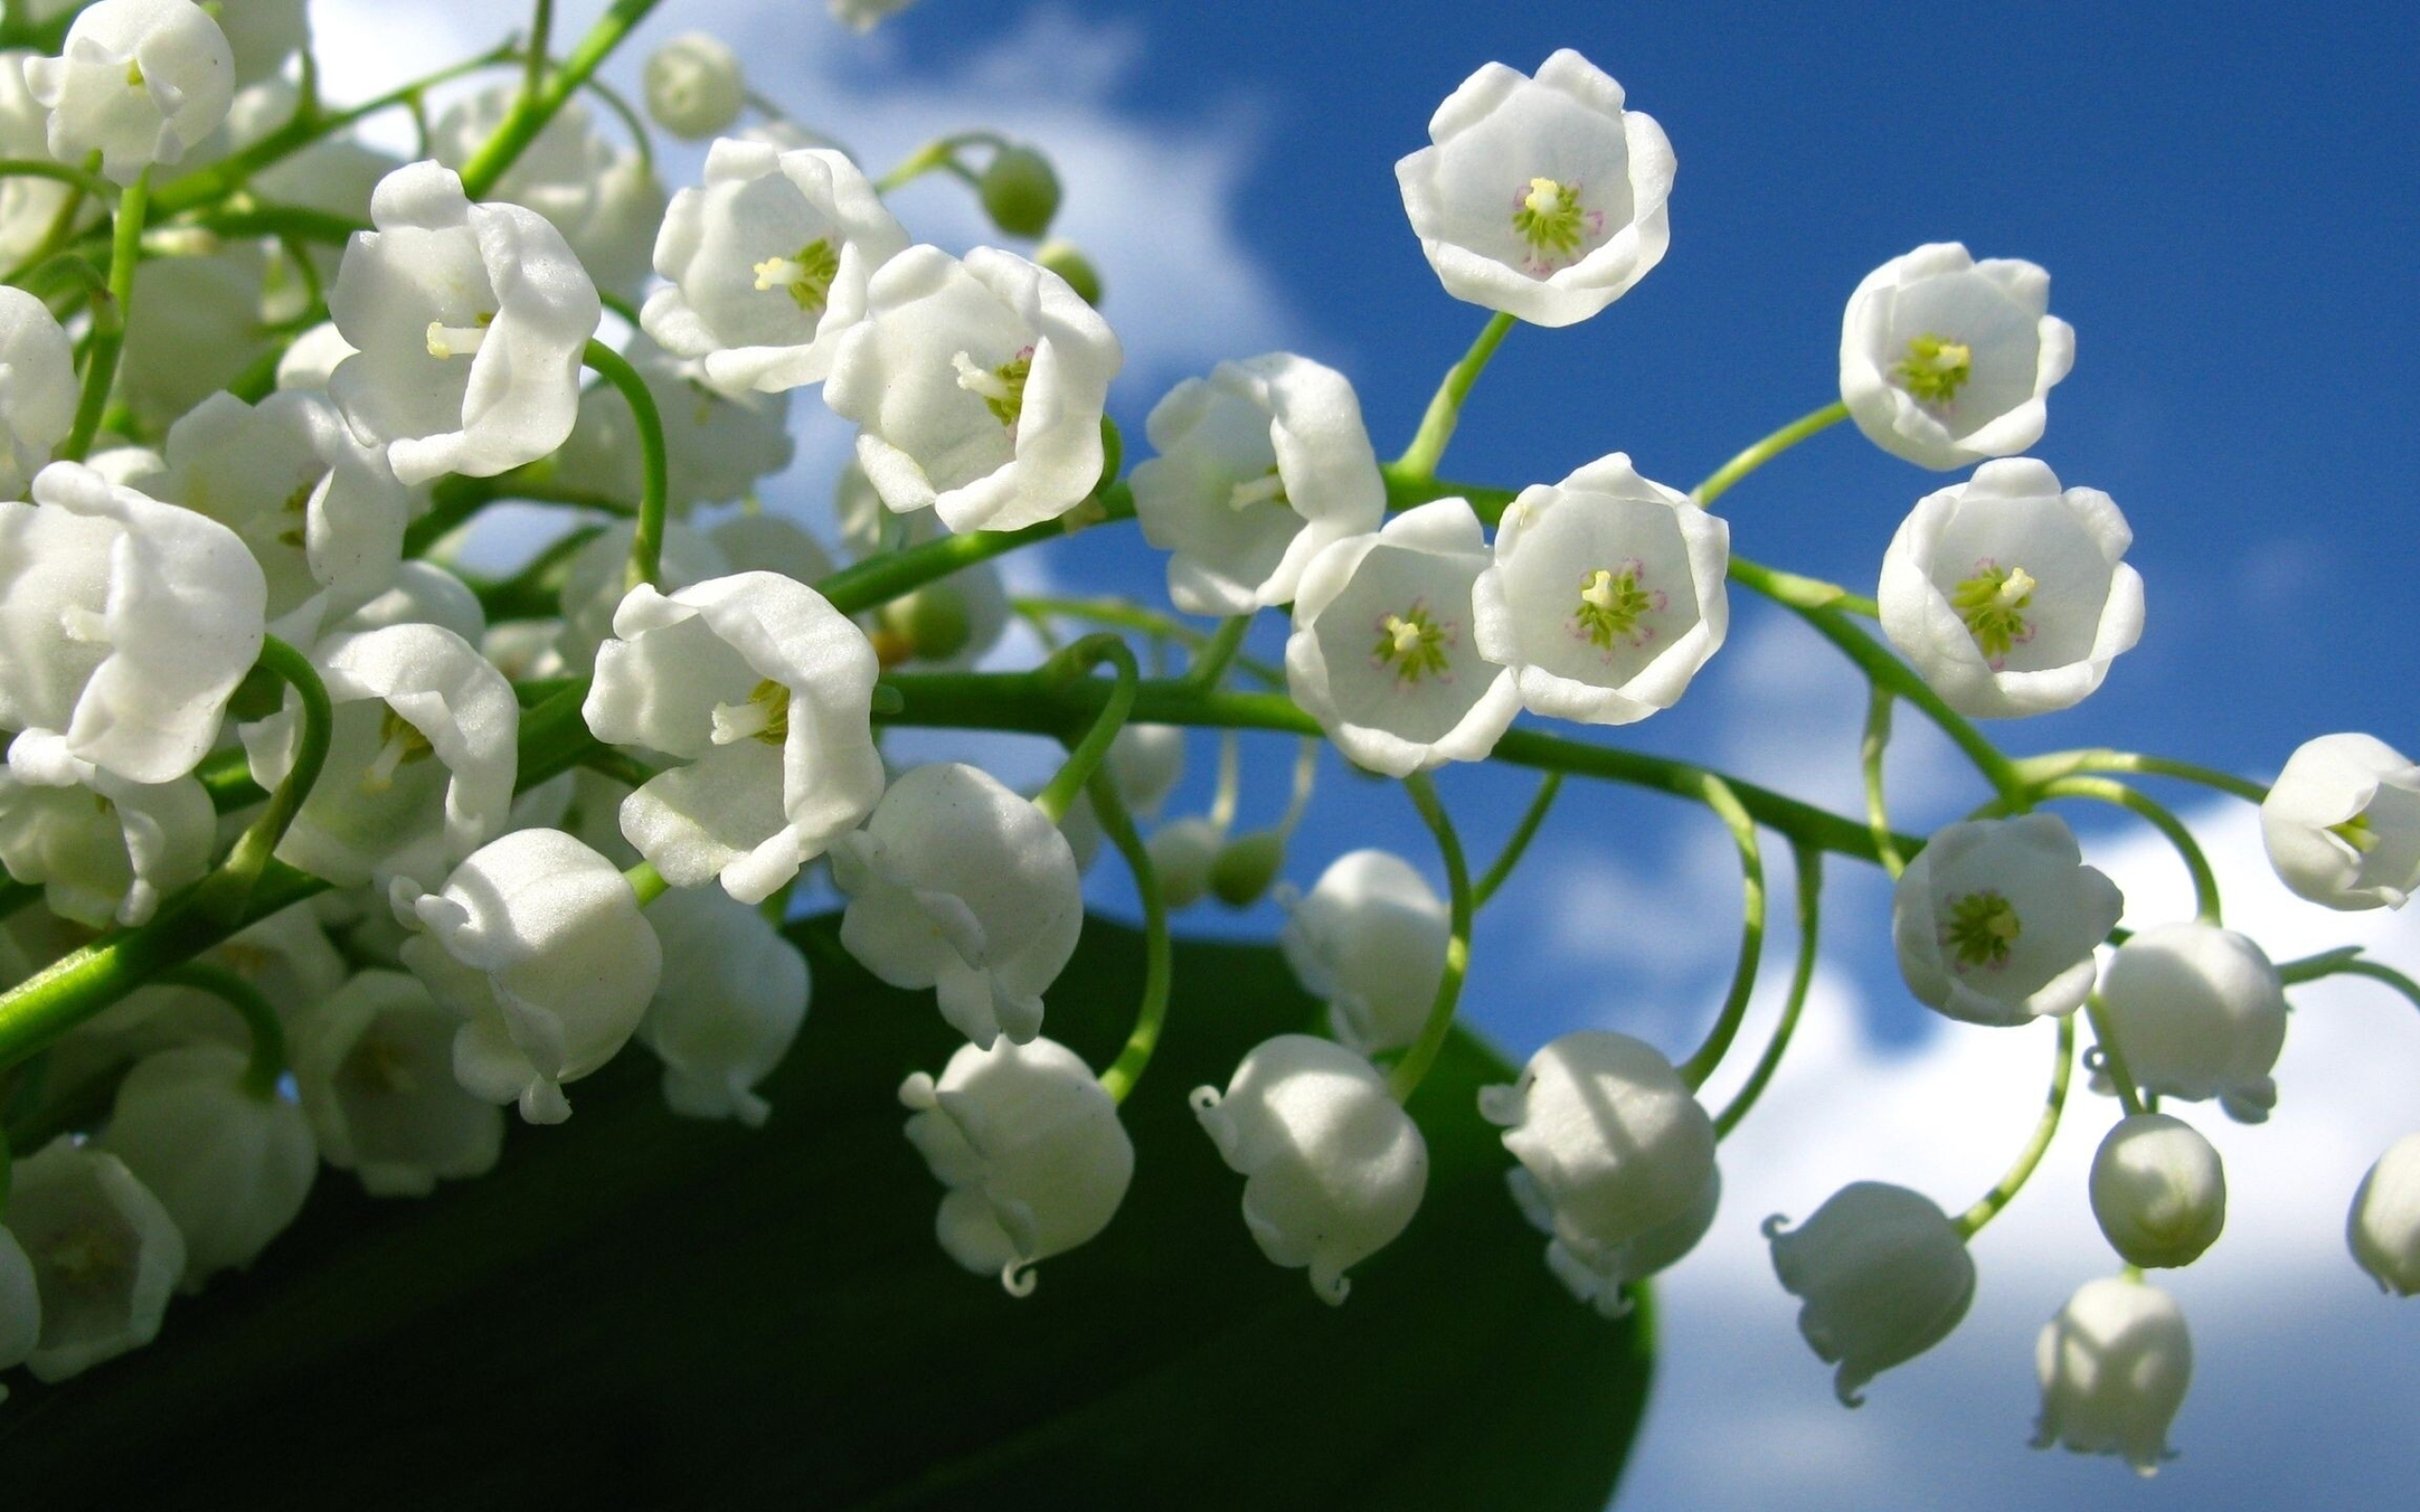 Lily of the Valley: Various kinds and cultivars are grown, including those with double flowers, rose-colored flowers, variegated foliage, and ones that grow larger than the typical species. 2560x1600 HD Background.